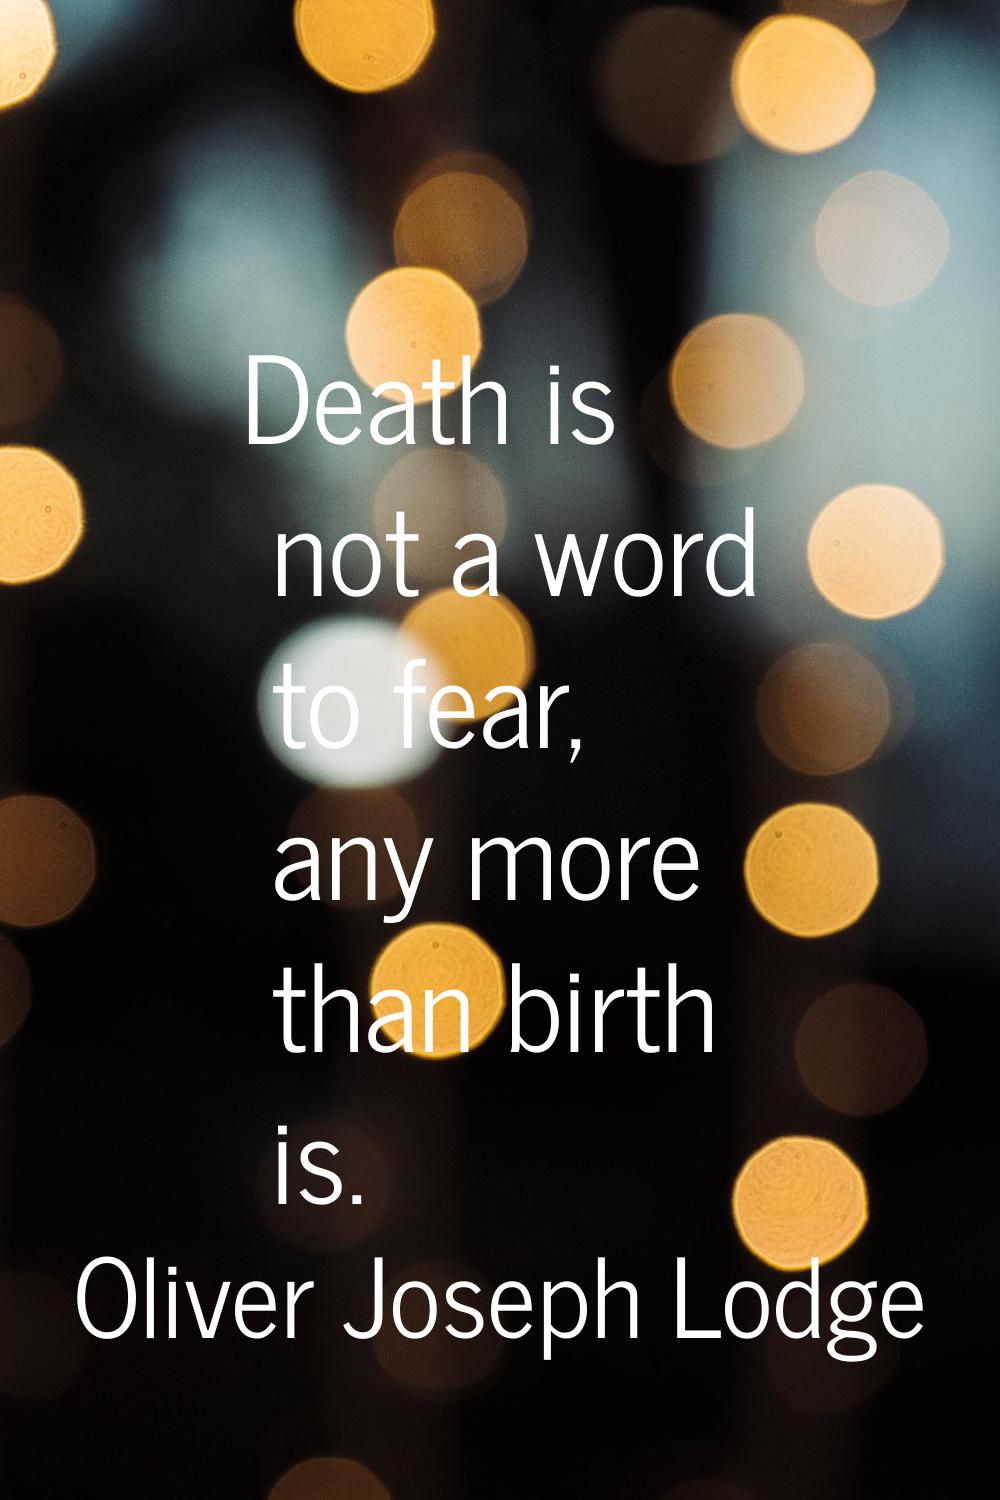 Death is not a word to fear, any more than birth is.